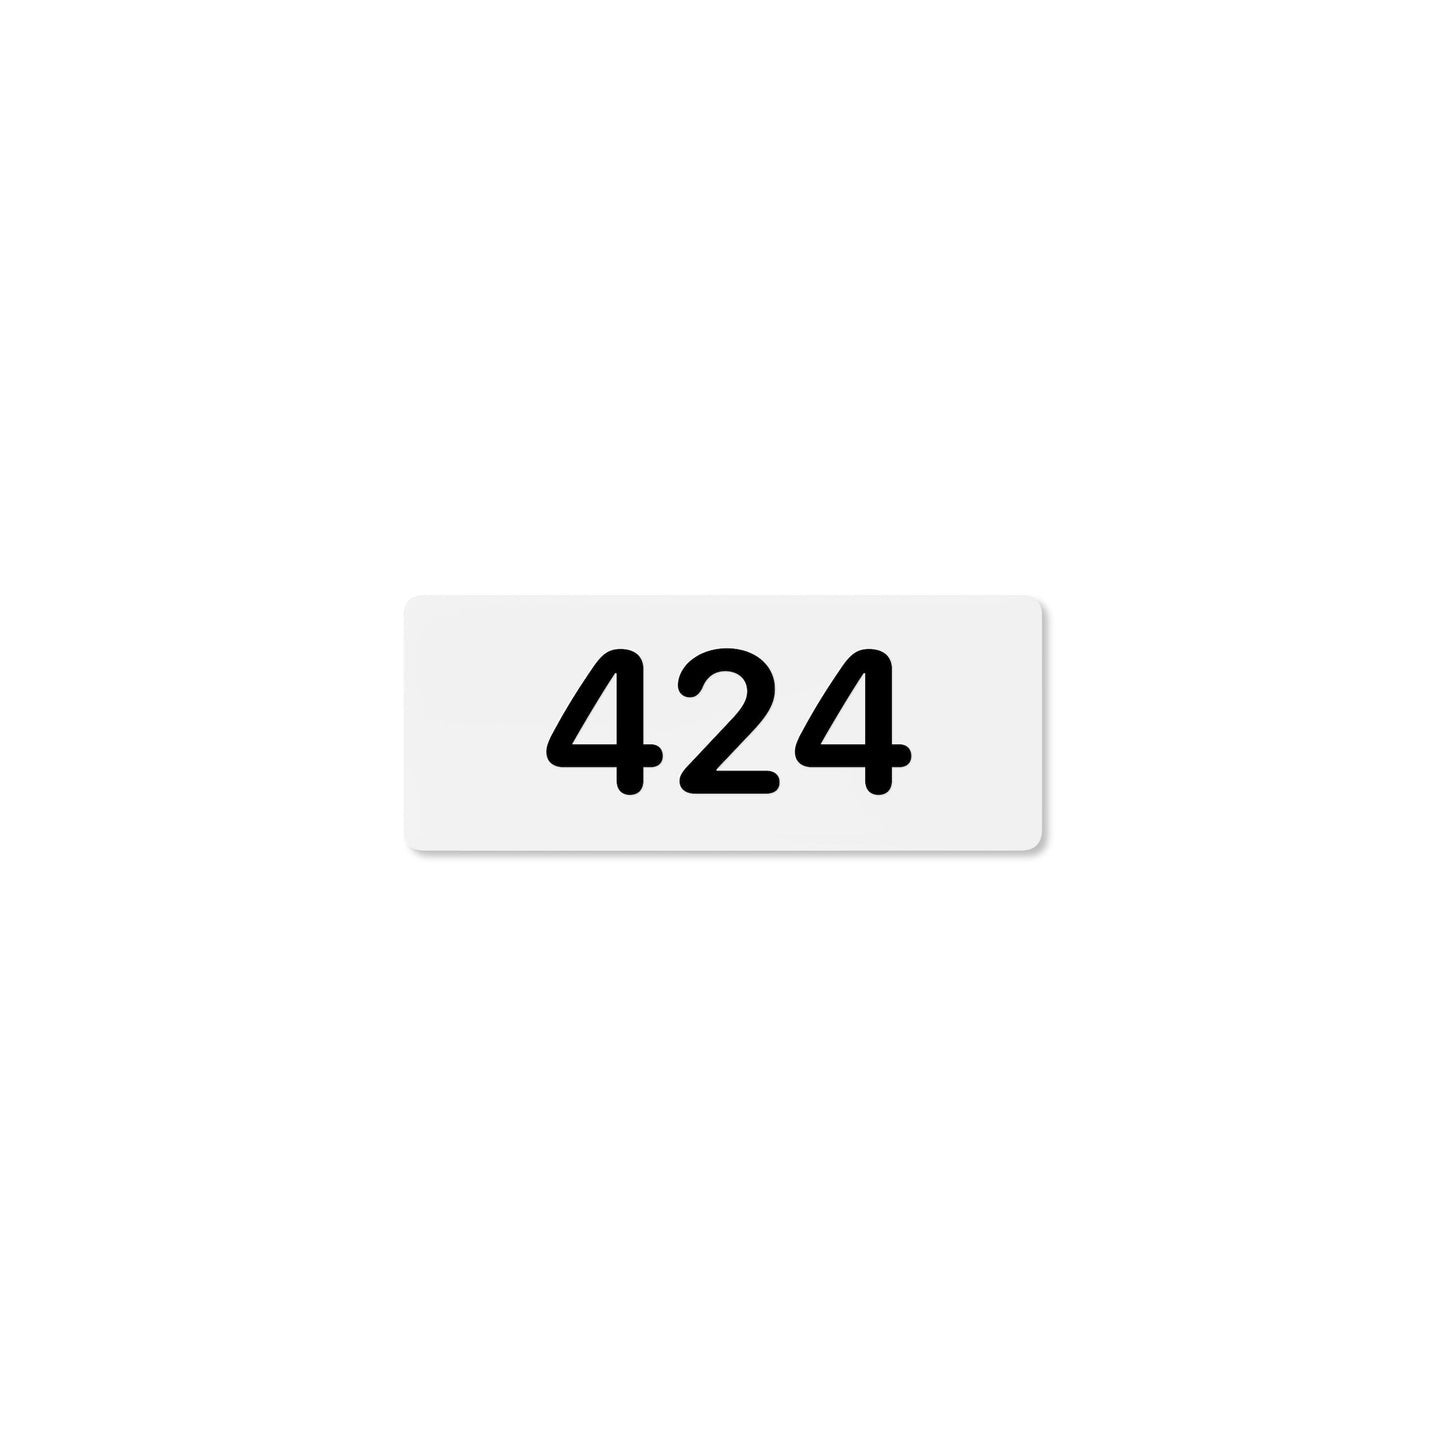 Numeral 424